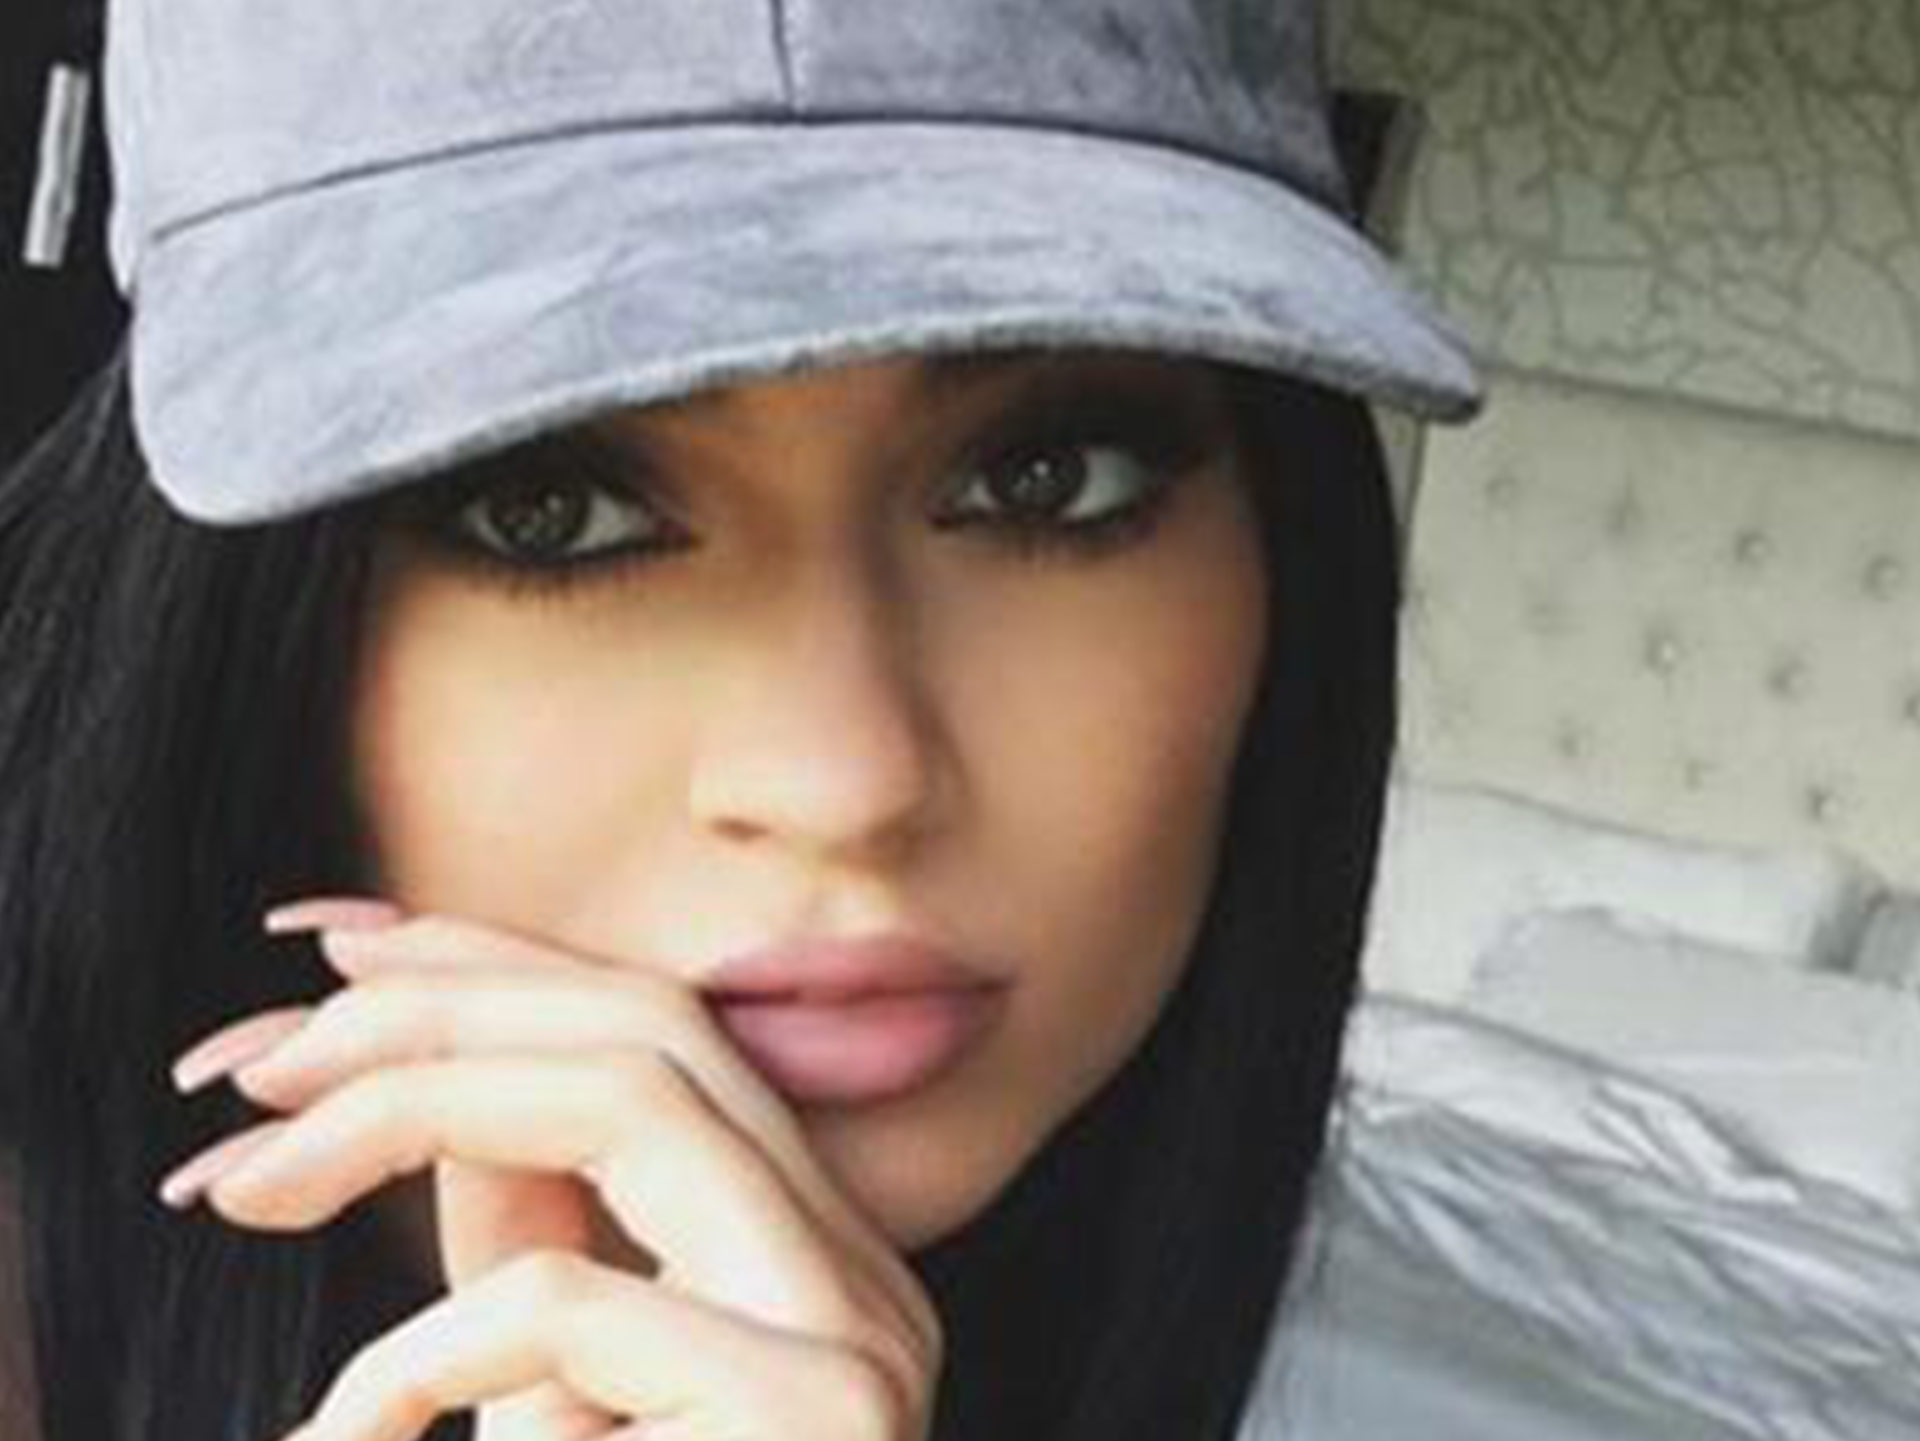 Hang on, is Kylie Jenner pregnant or not?